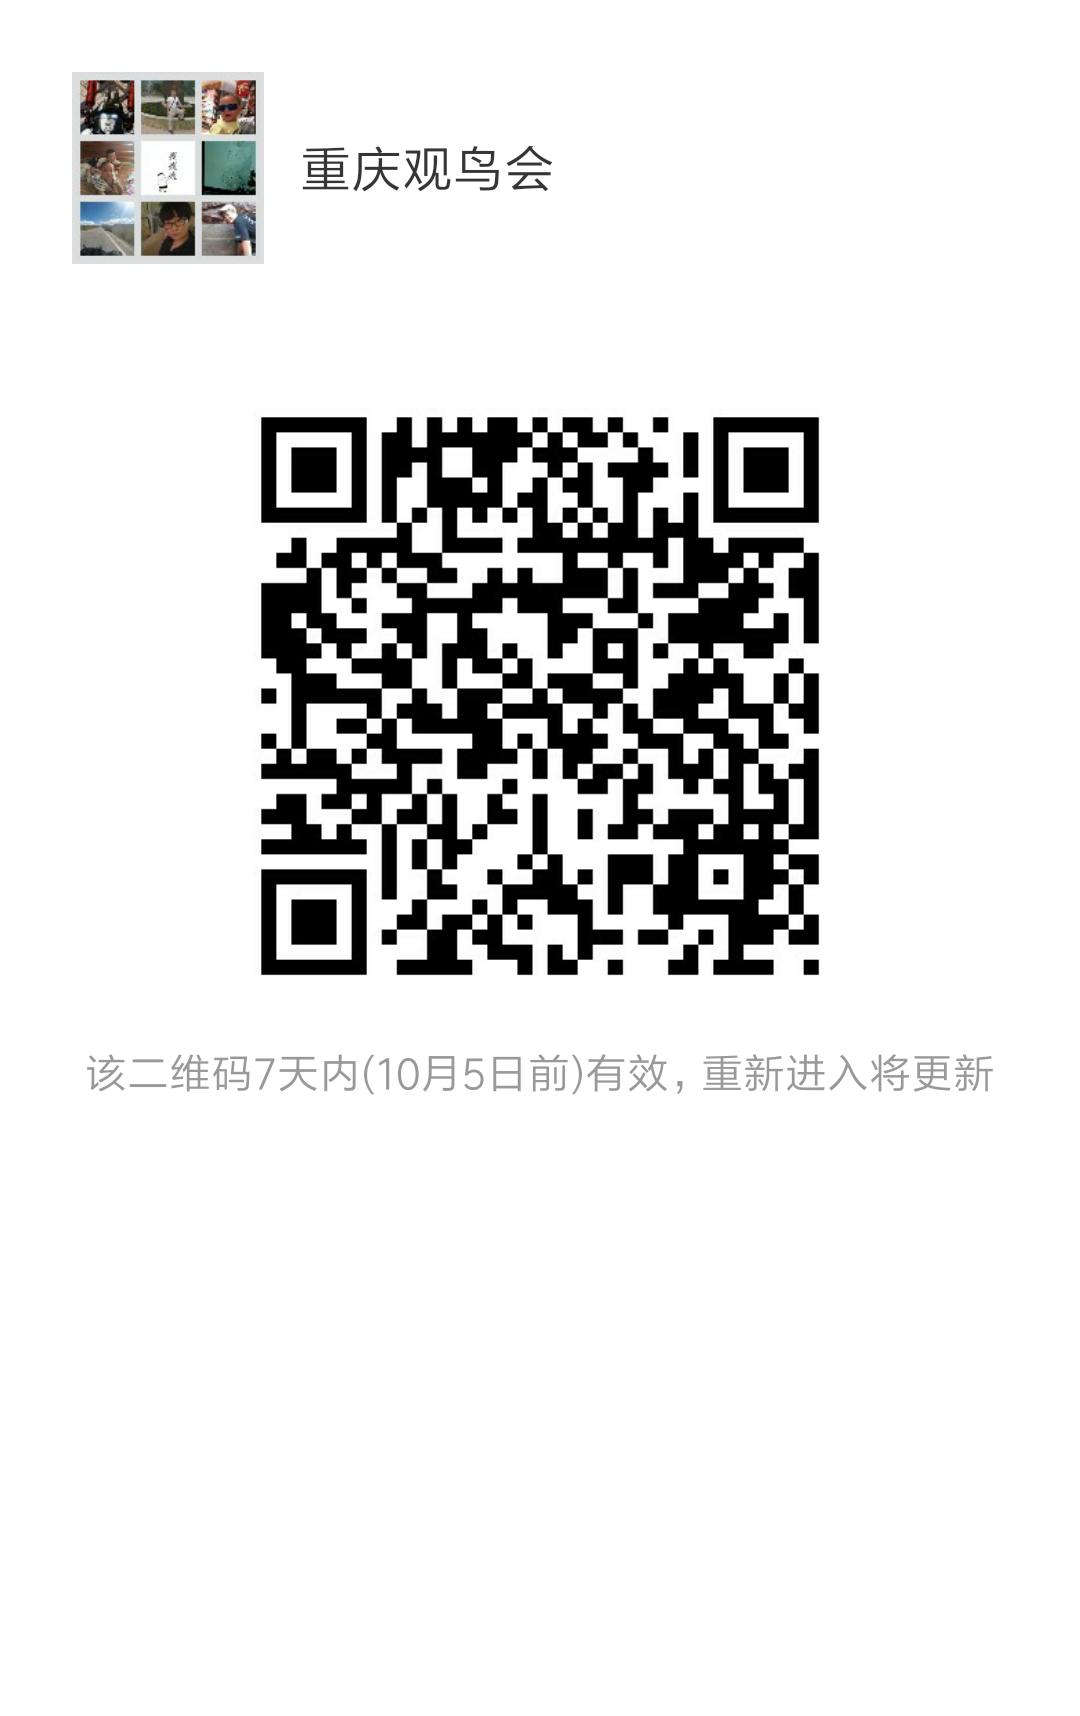 mmqrcode1475045933970.png